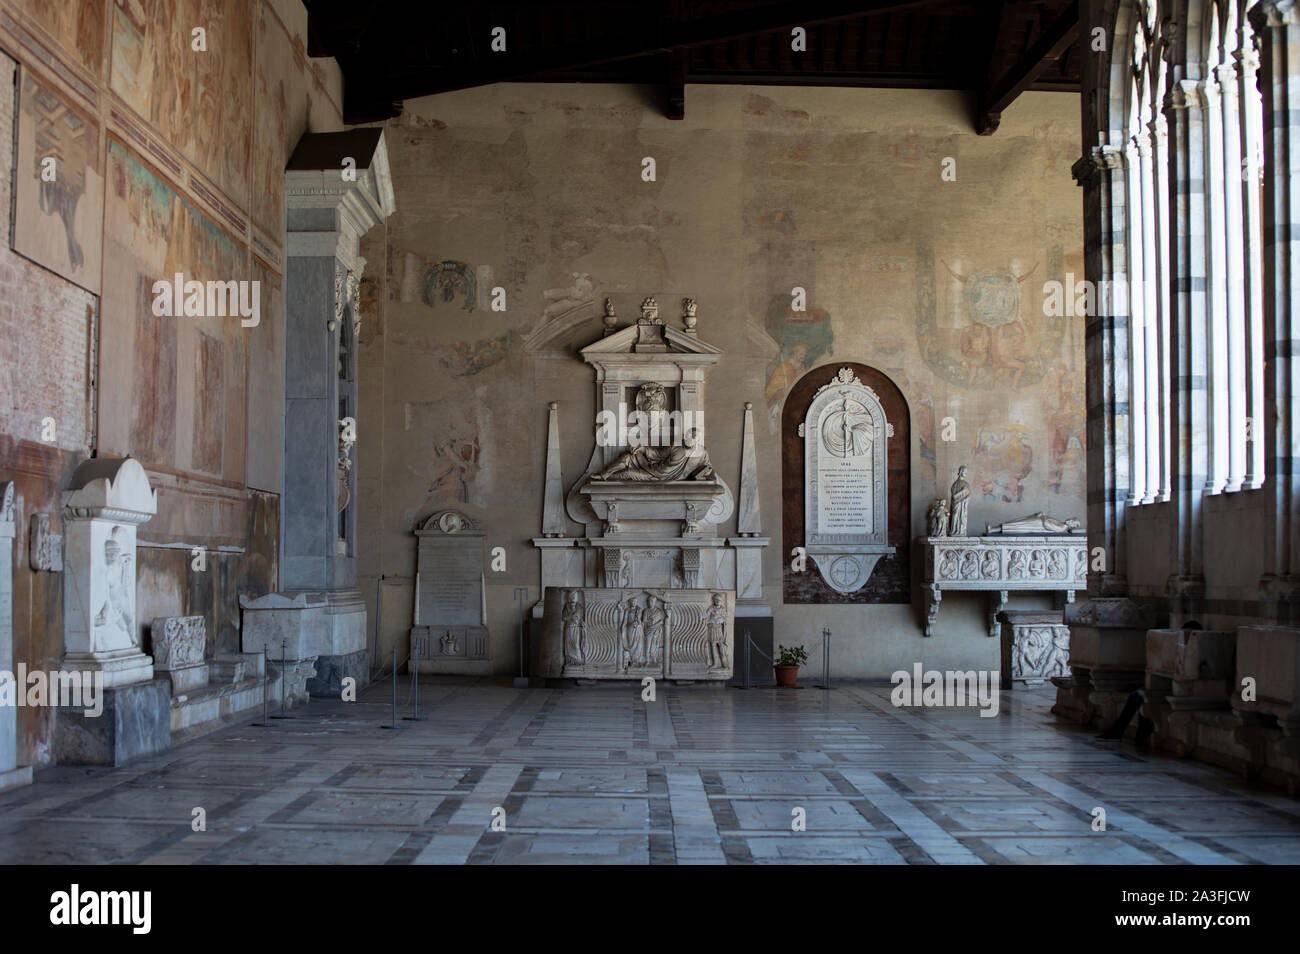 Detail of the interior marble arcades & gothic arches of the Camposanto on the Campo Dei Miracoli in Pisa, showing the ancient tombs and frescos. Stock Photo